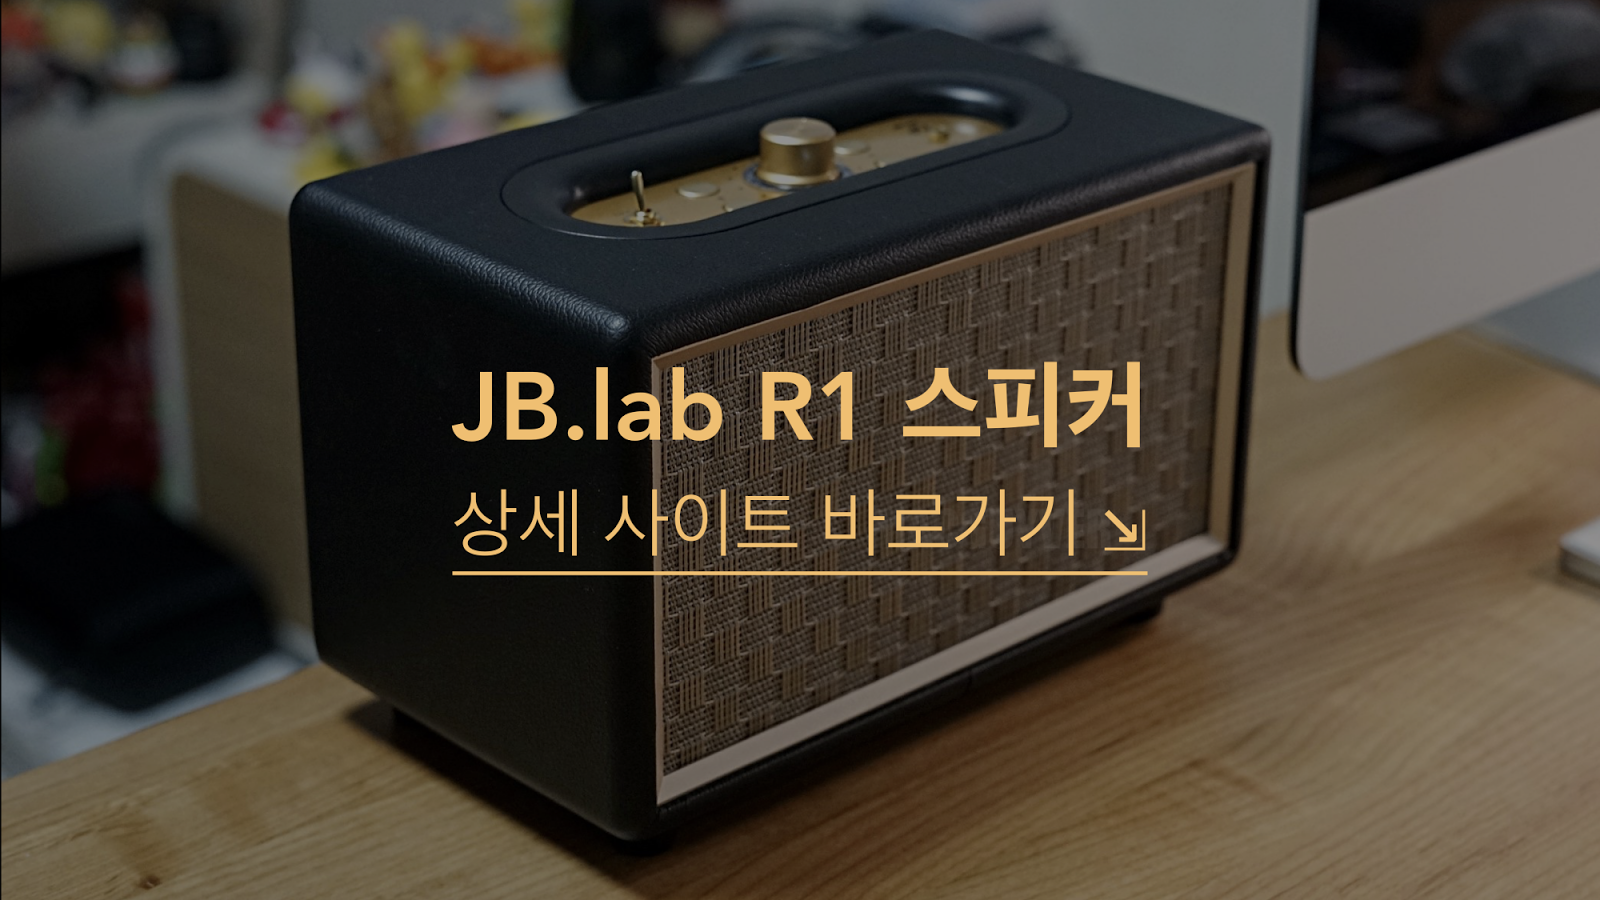 http://jbshop.kr/product/detail.html?product_no=971&cate_no=71&display_group=1